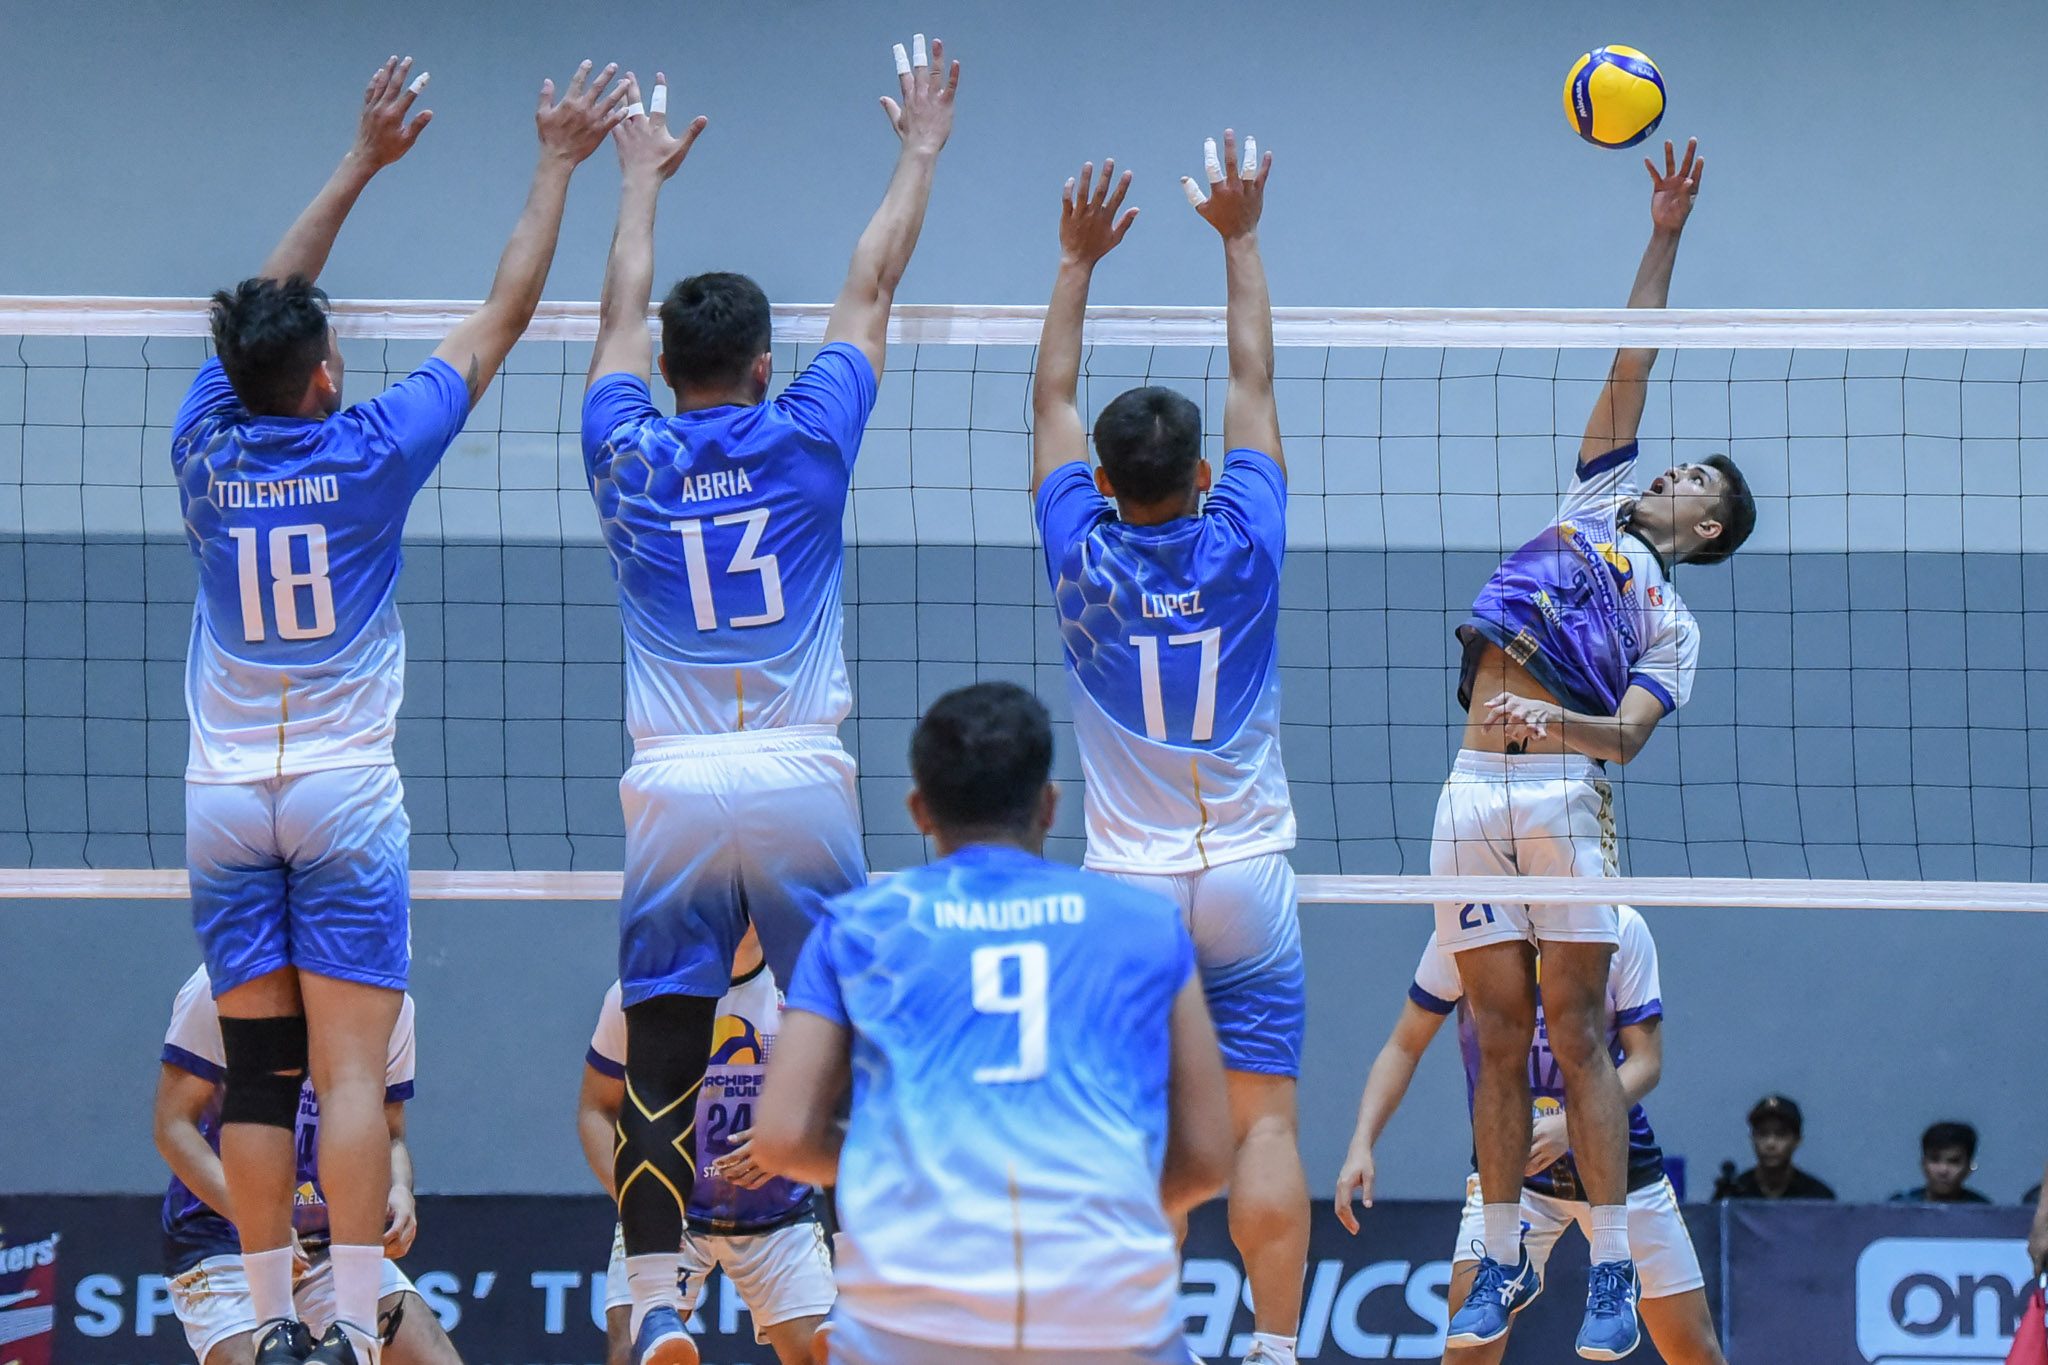 Air Force keeps Spikers’ Turf champ NU winless off 5th-set rout; Iloilo takes solo 1st